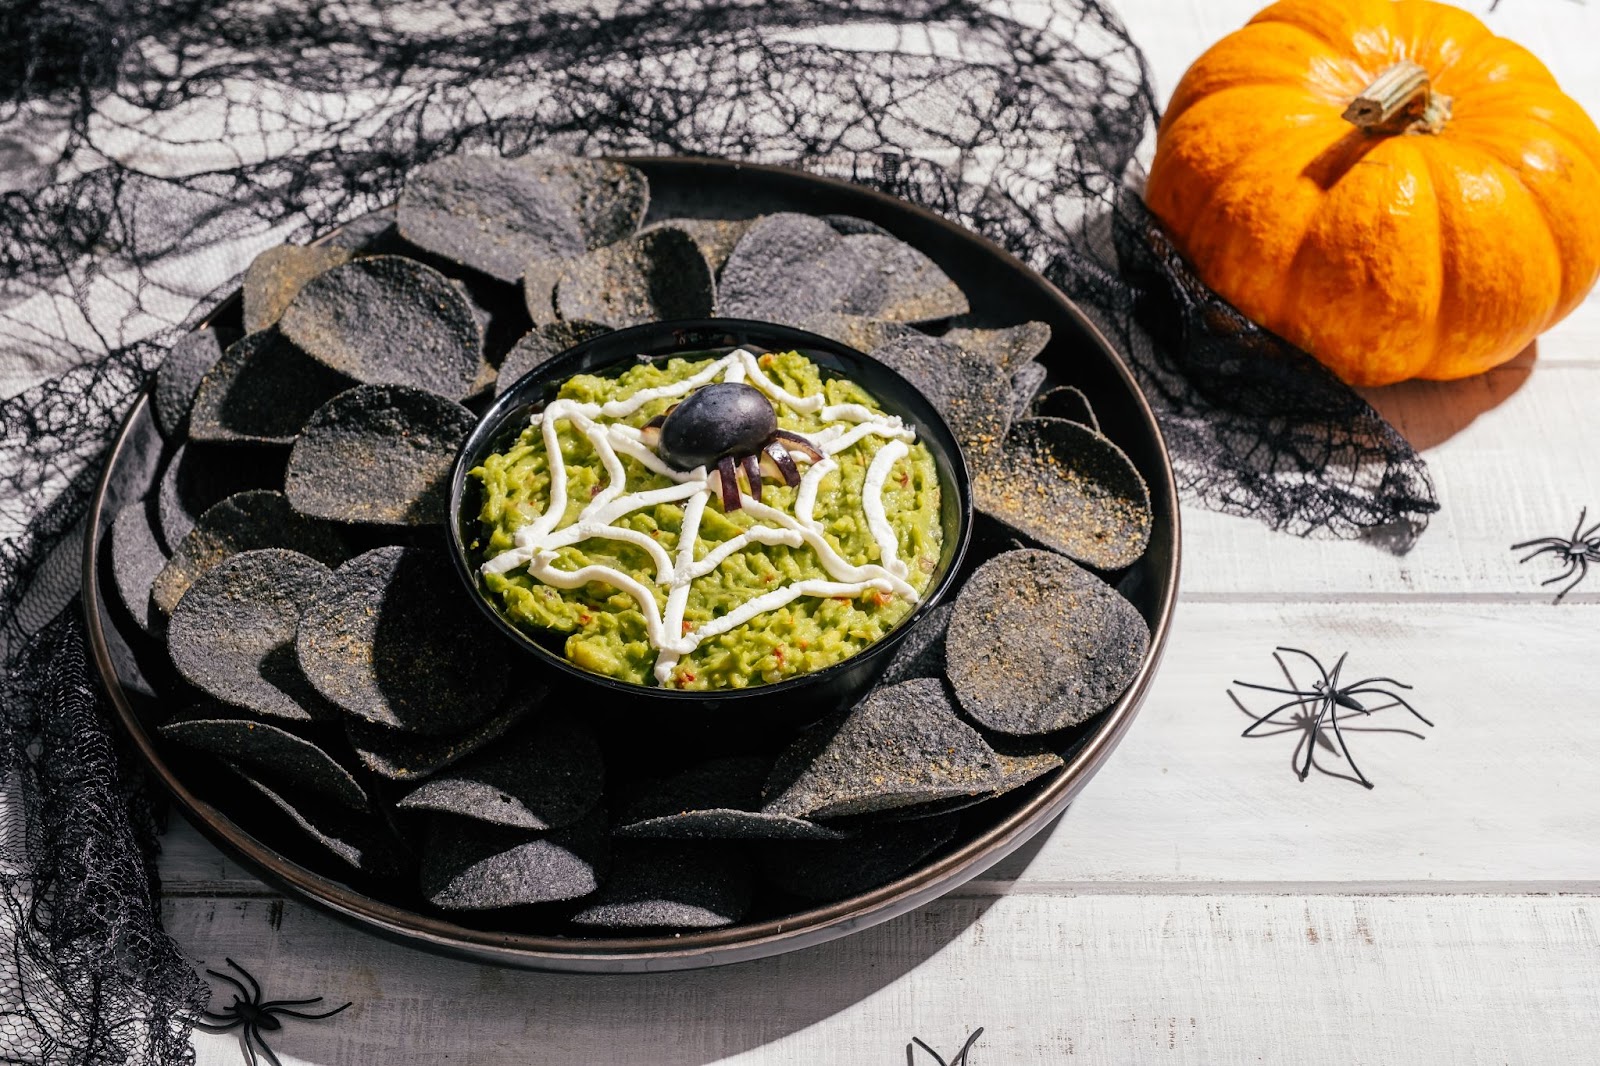 Festive bowl of guacamole decorated for halloween